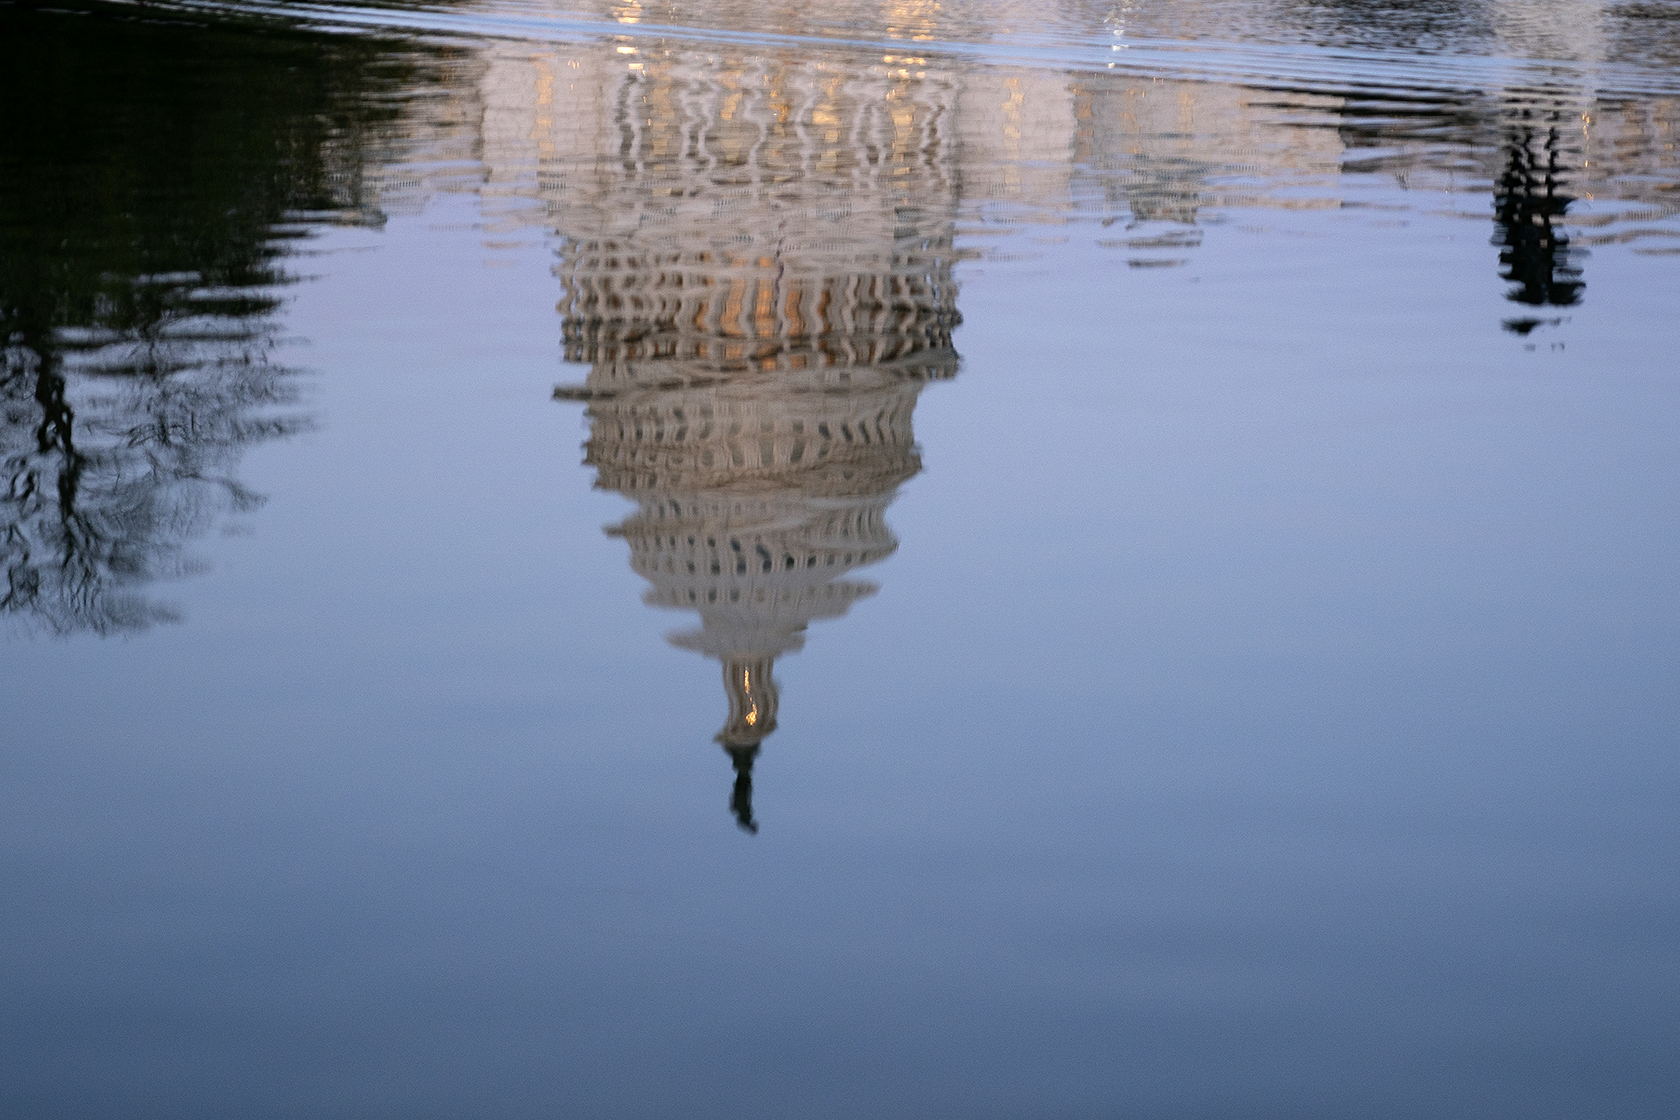 Capitol dome upside down reflected in water